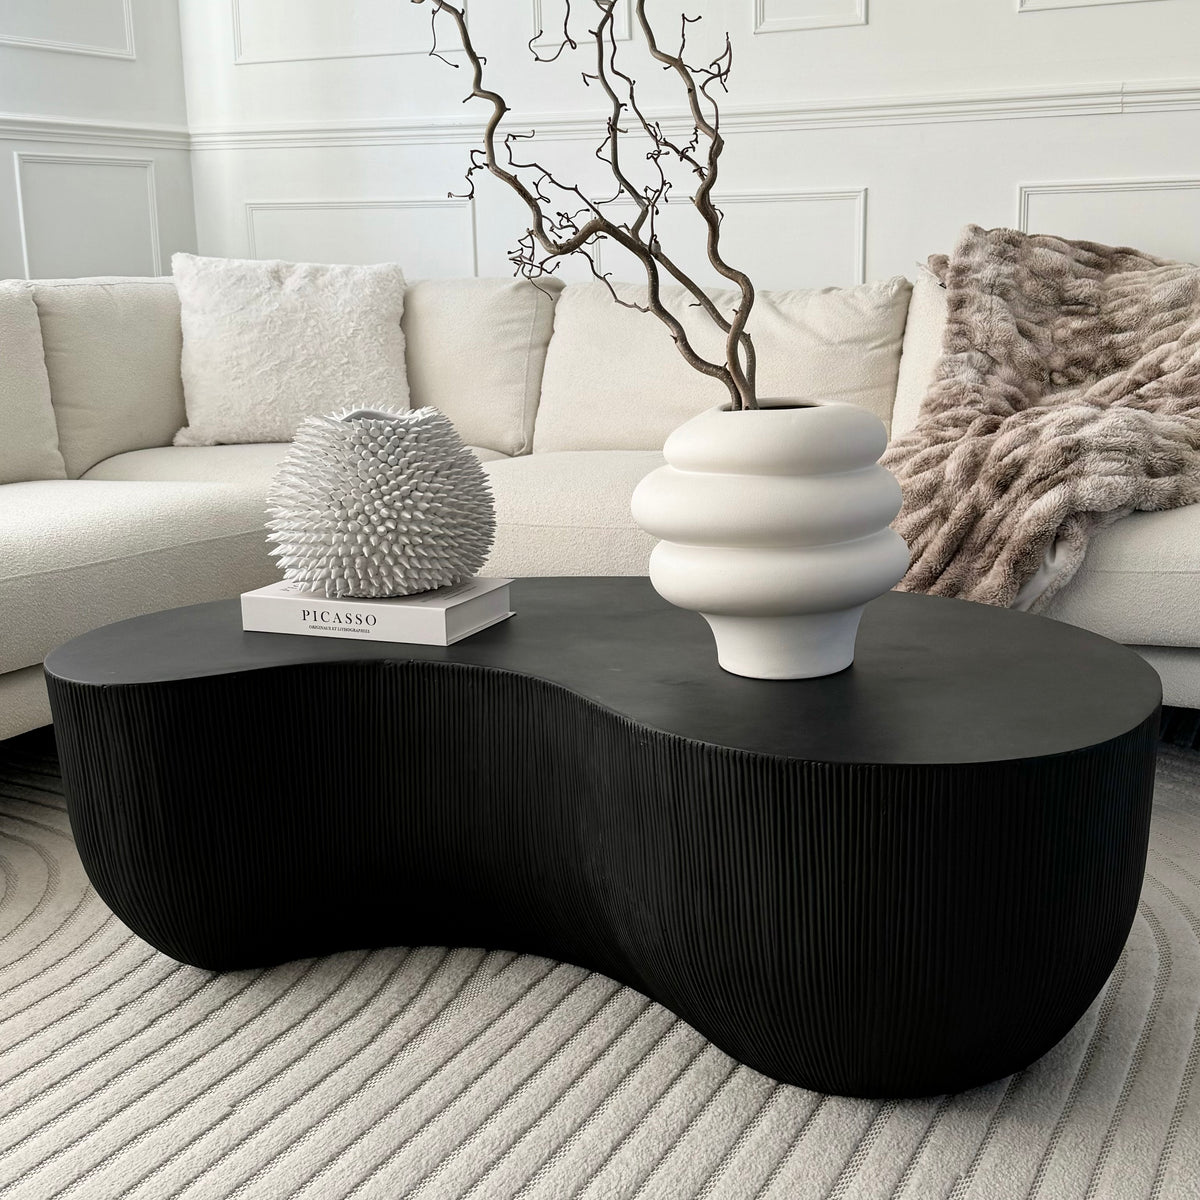 Minimal Onyx Shaped Coffee Table Large adorned with ceramics and organic shapes